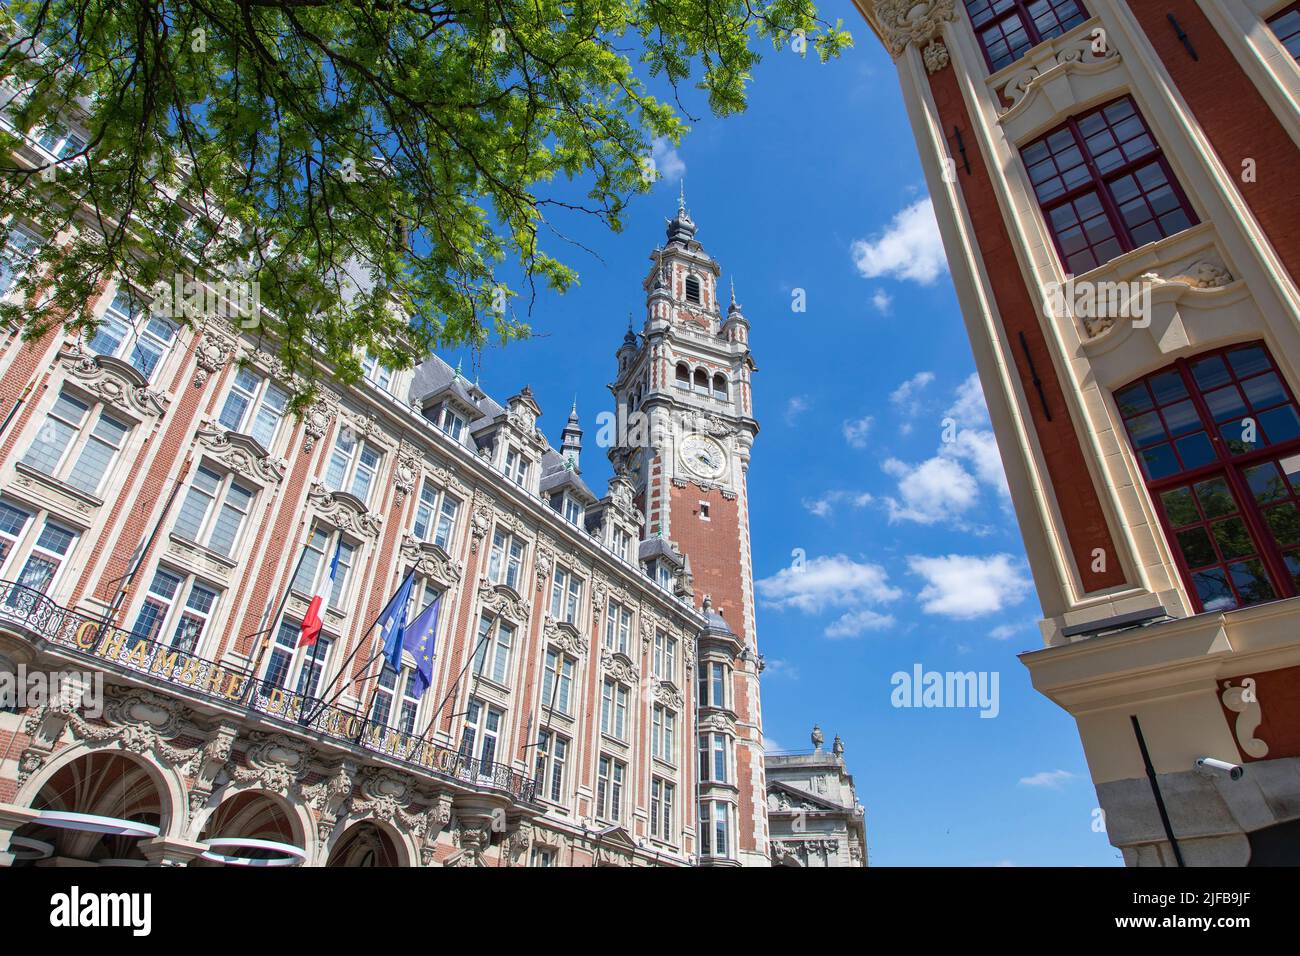 France, Nord, Lille, Theater Square, belfry of the Chamber of Commerce and Industry of Lille (CCI) Stock Photo